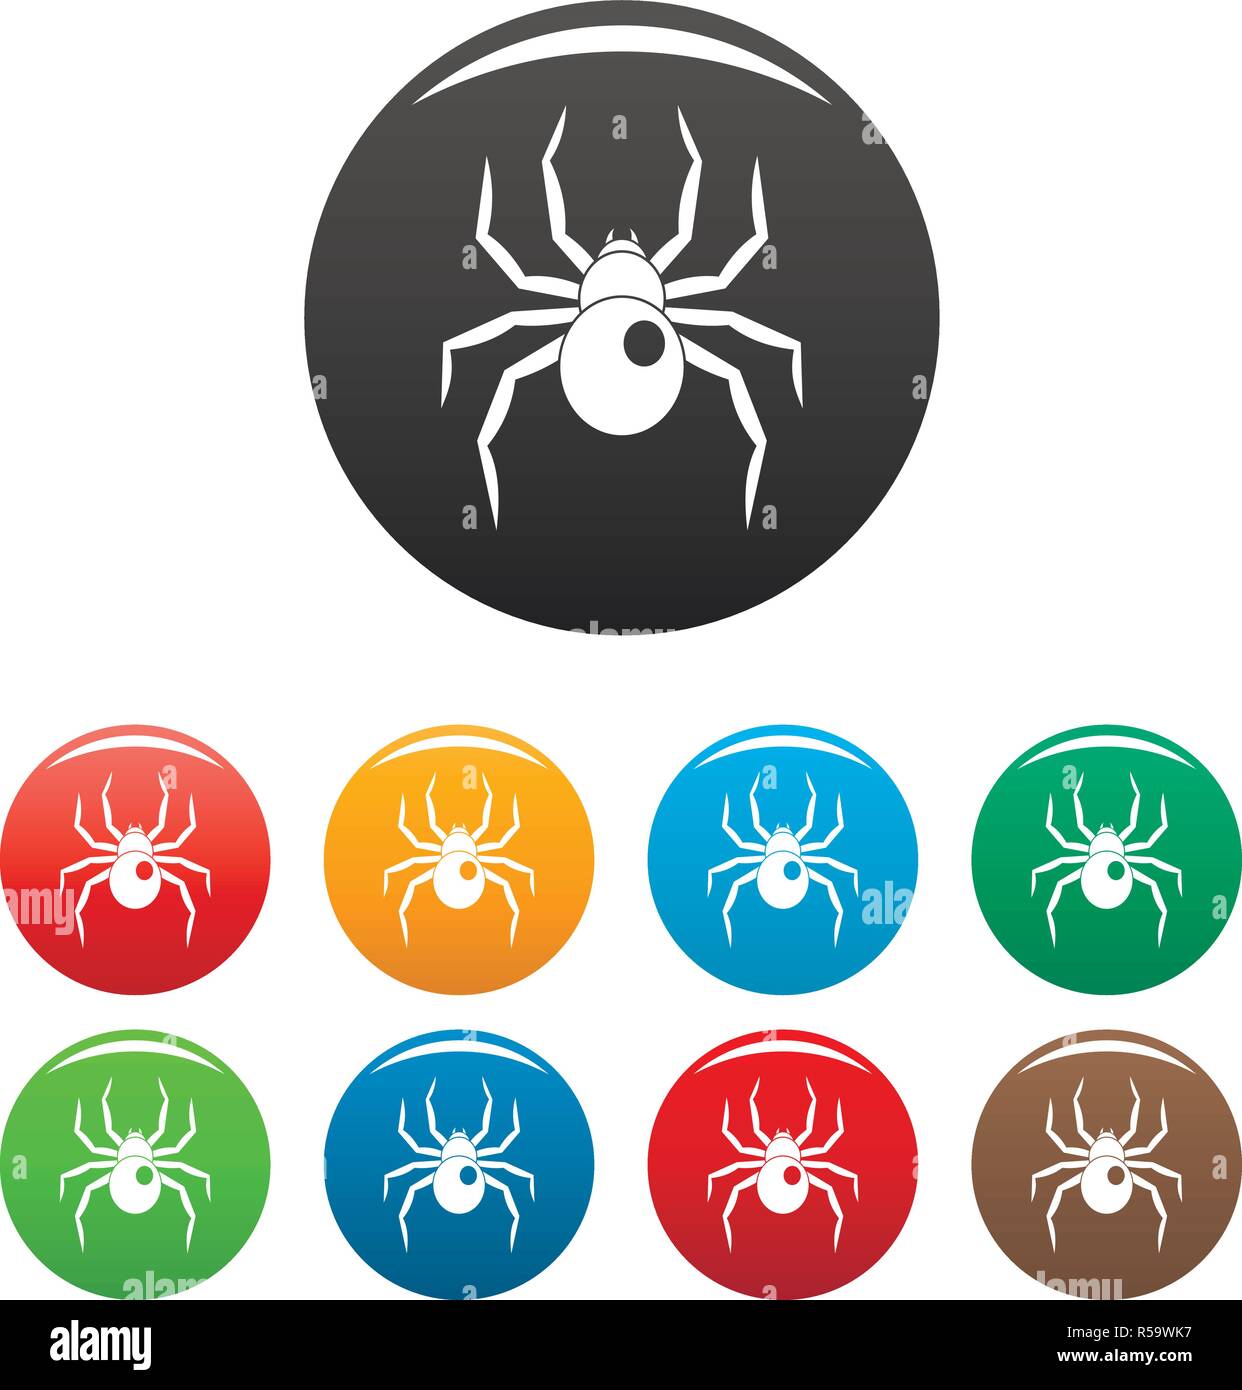 Black widow spider icons set 9 color vector isolated on white for any design Stock Vector